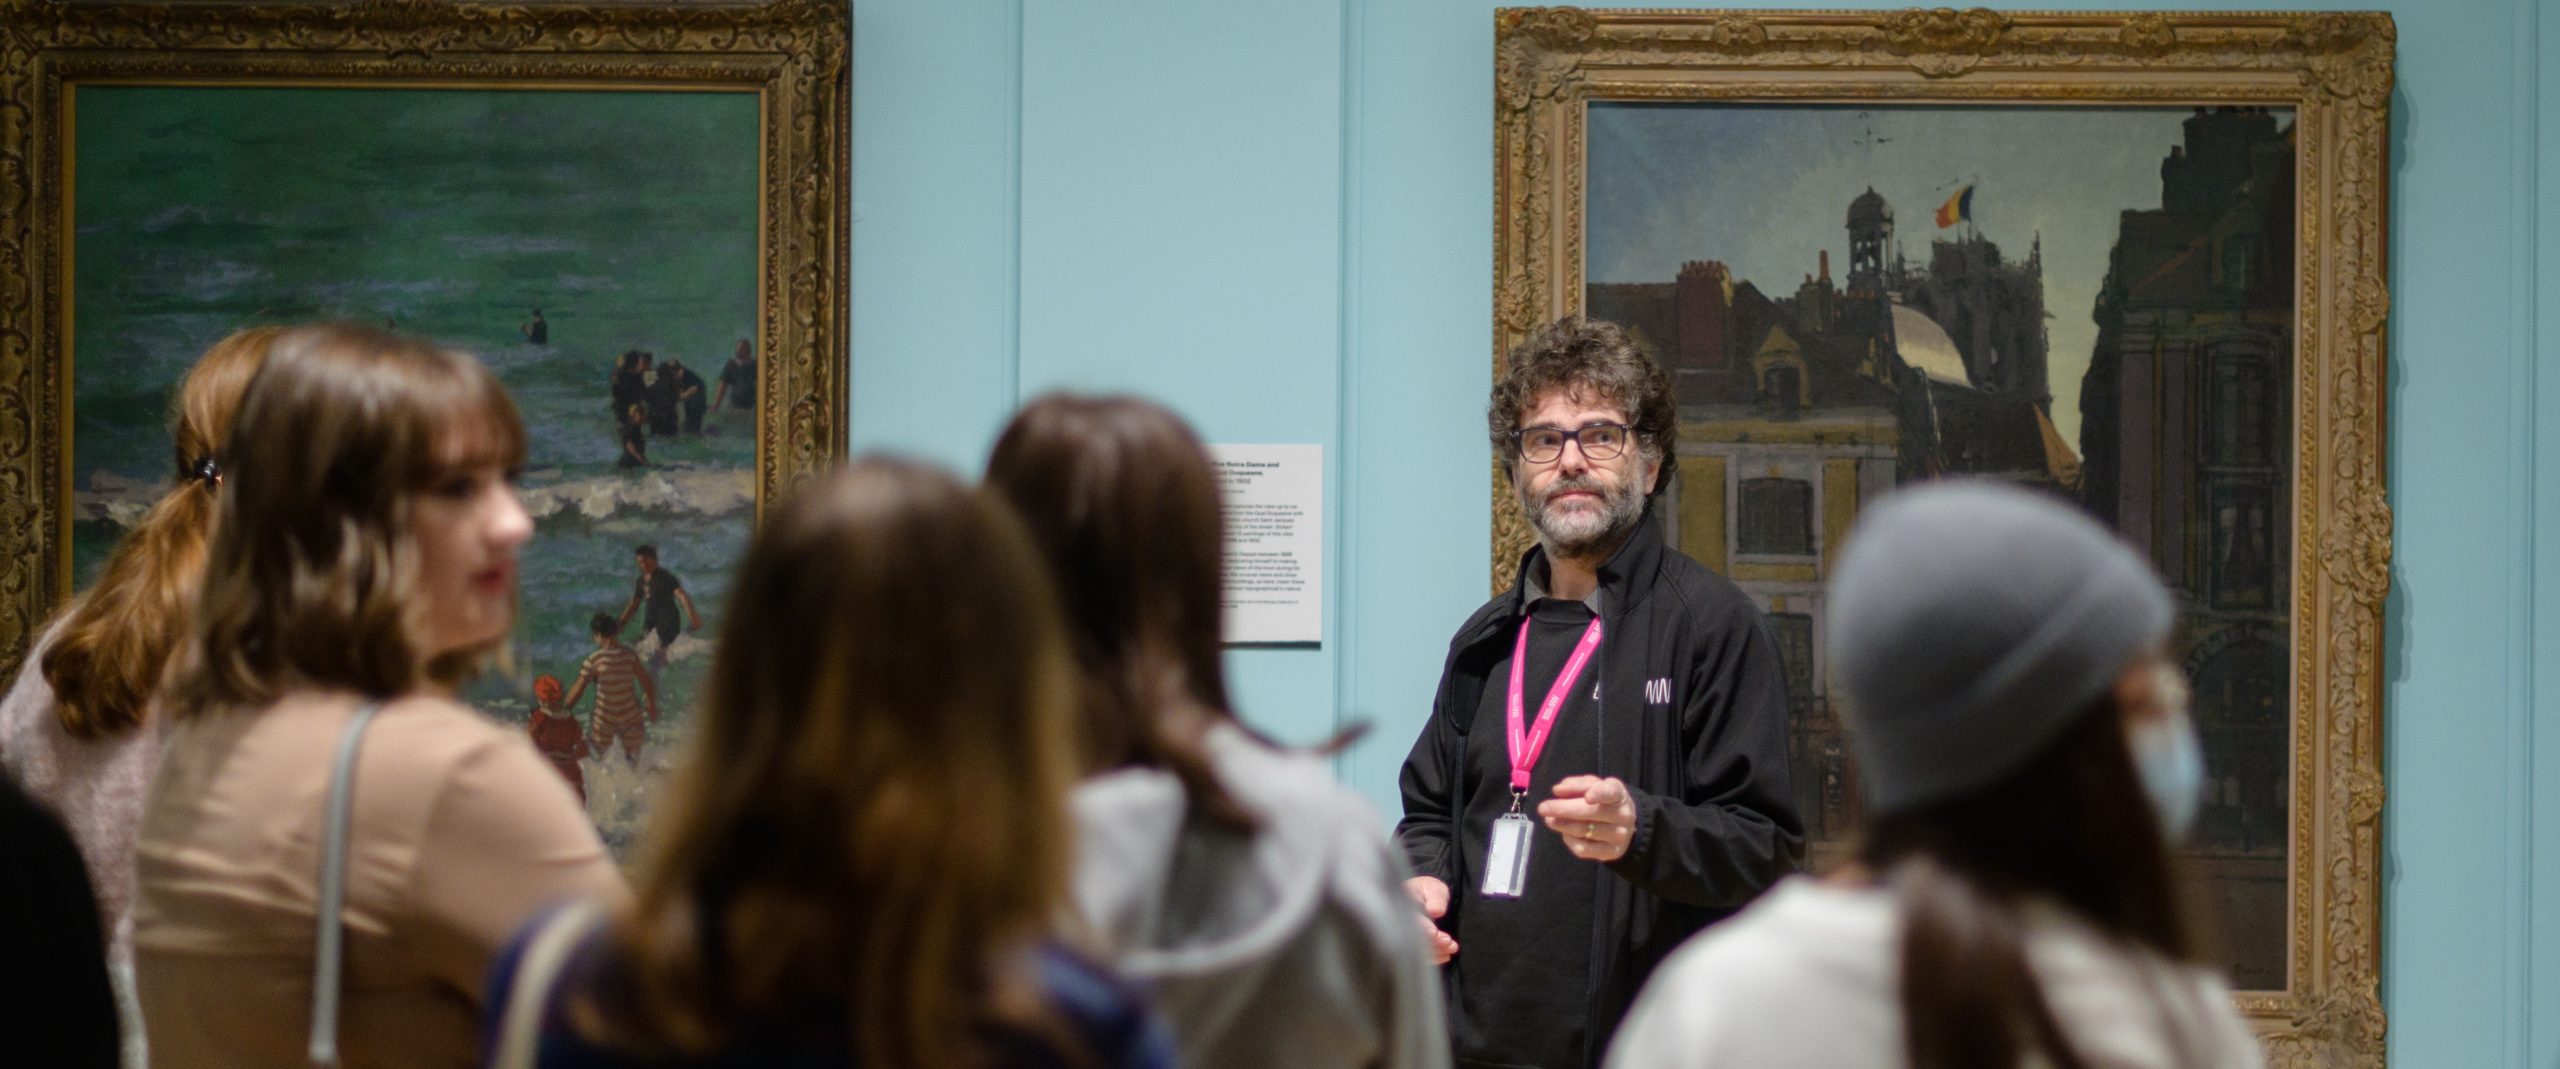 A museum assistant wearing a lanyard stands in a gallery in front of a painting and talks to an audience of young people.